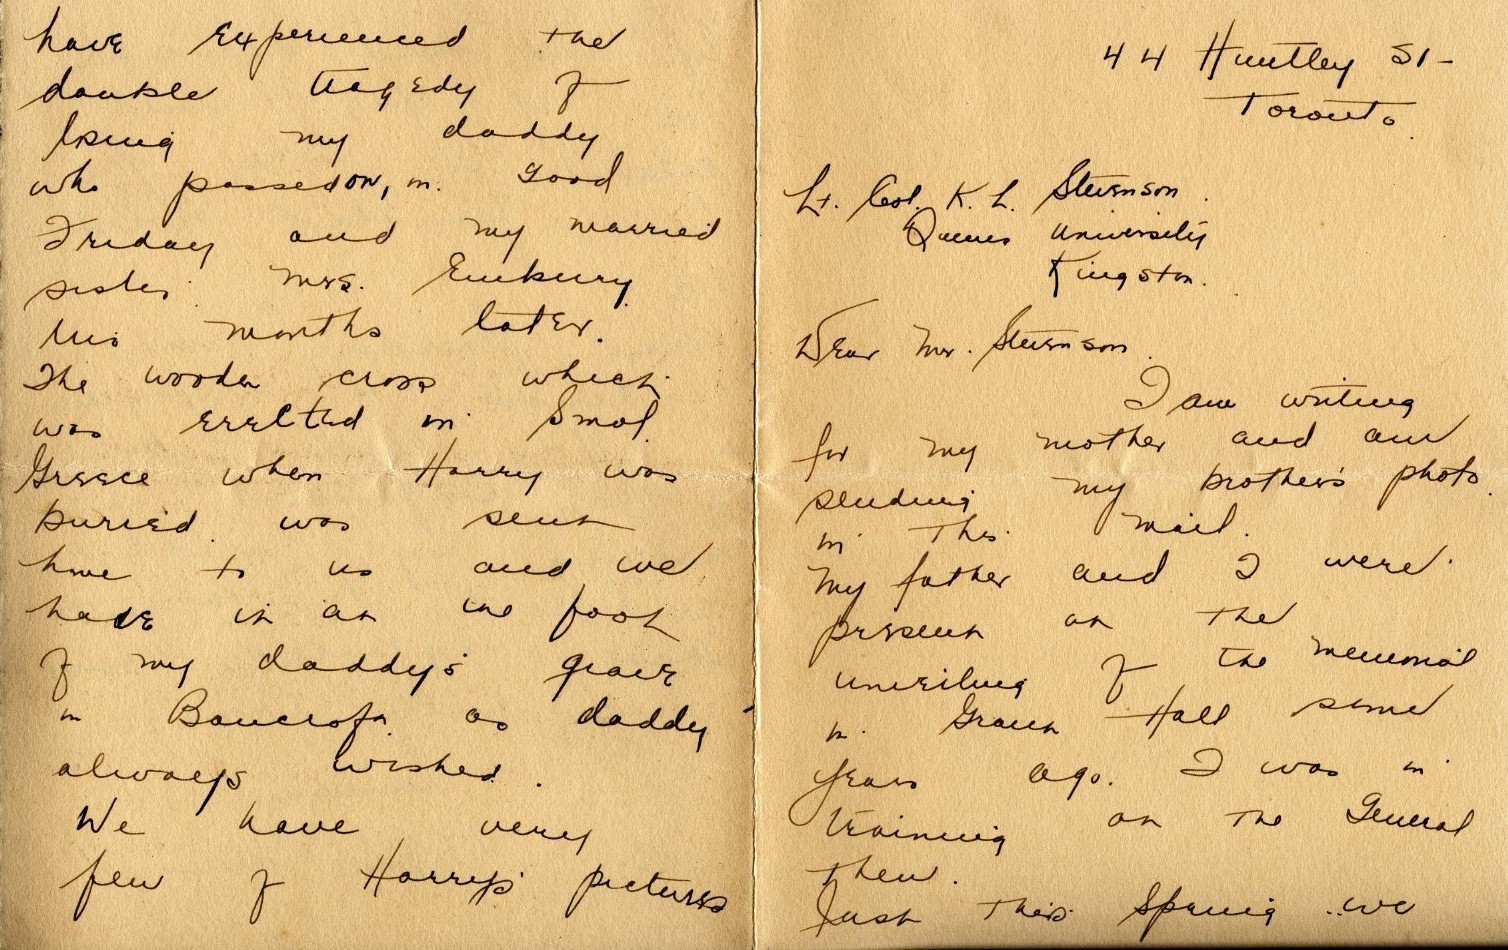 Letter from Jarman's Brother to Lt. Col. K.L. Stevenson, Page 1 and 2